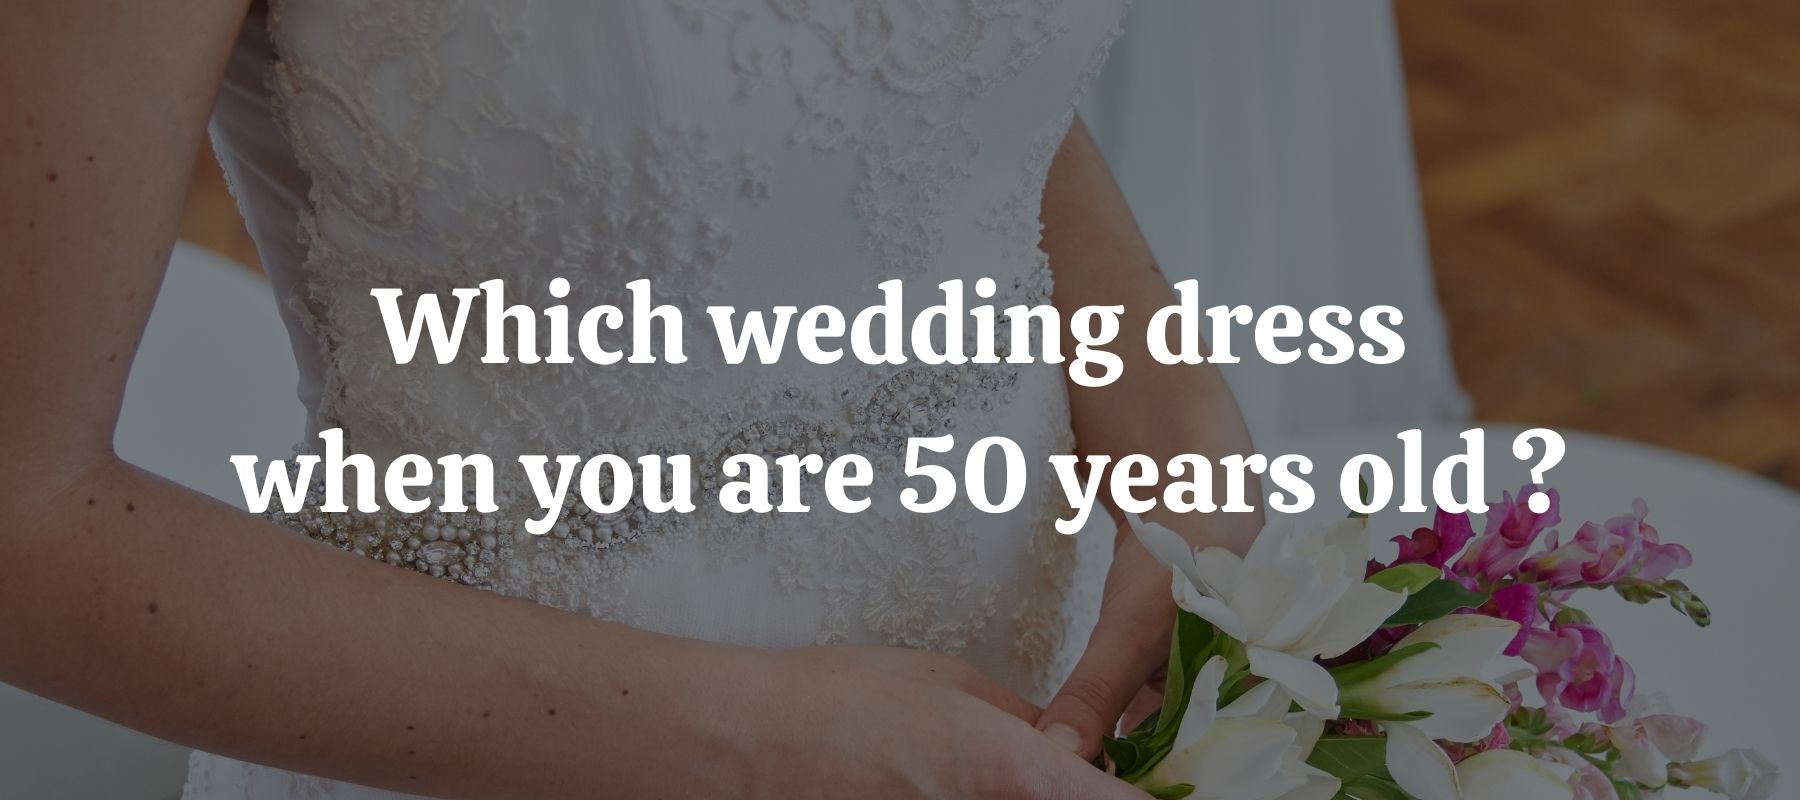 Which wedding dress when you are 50 years old